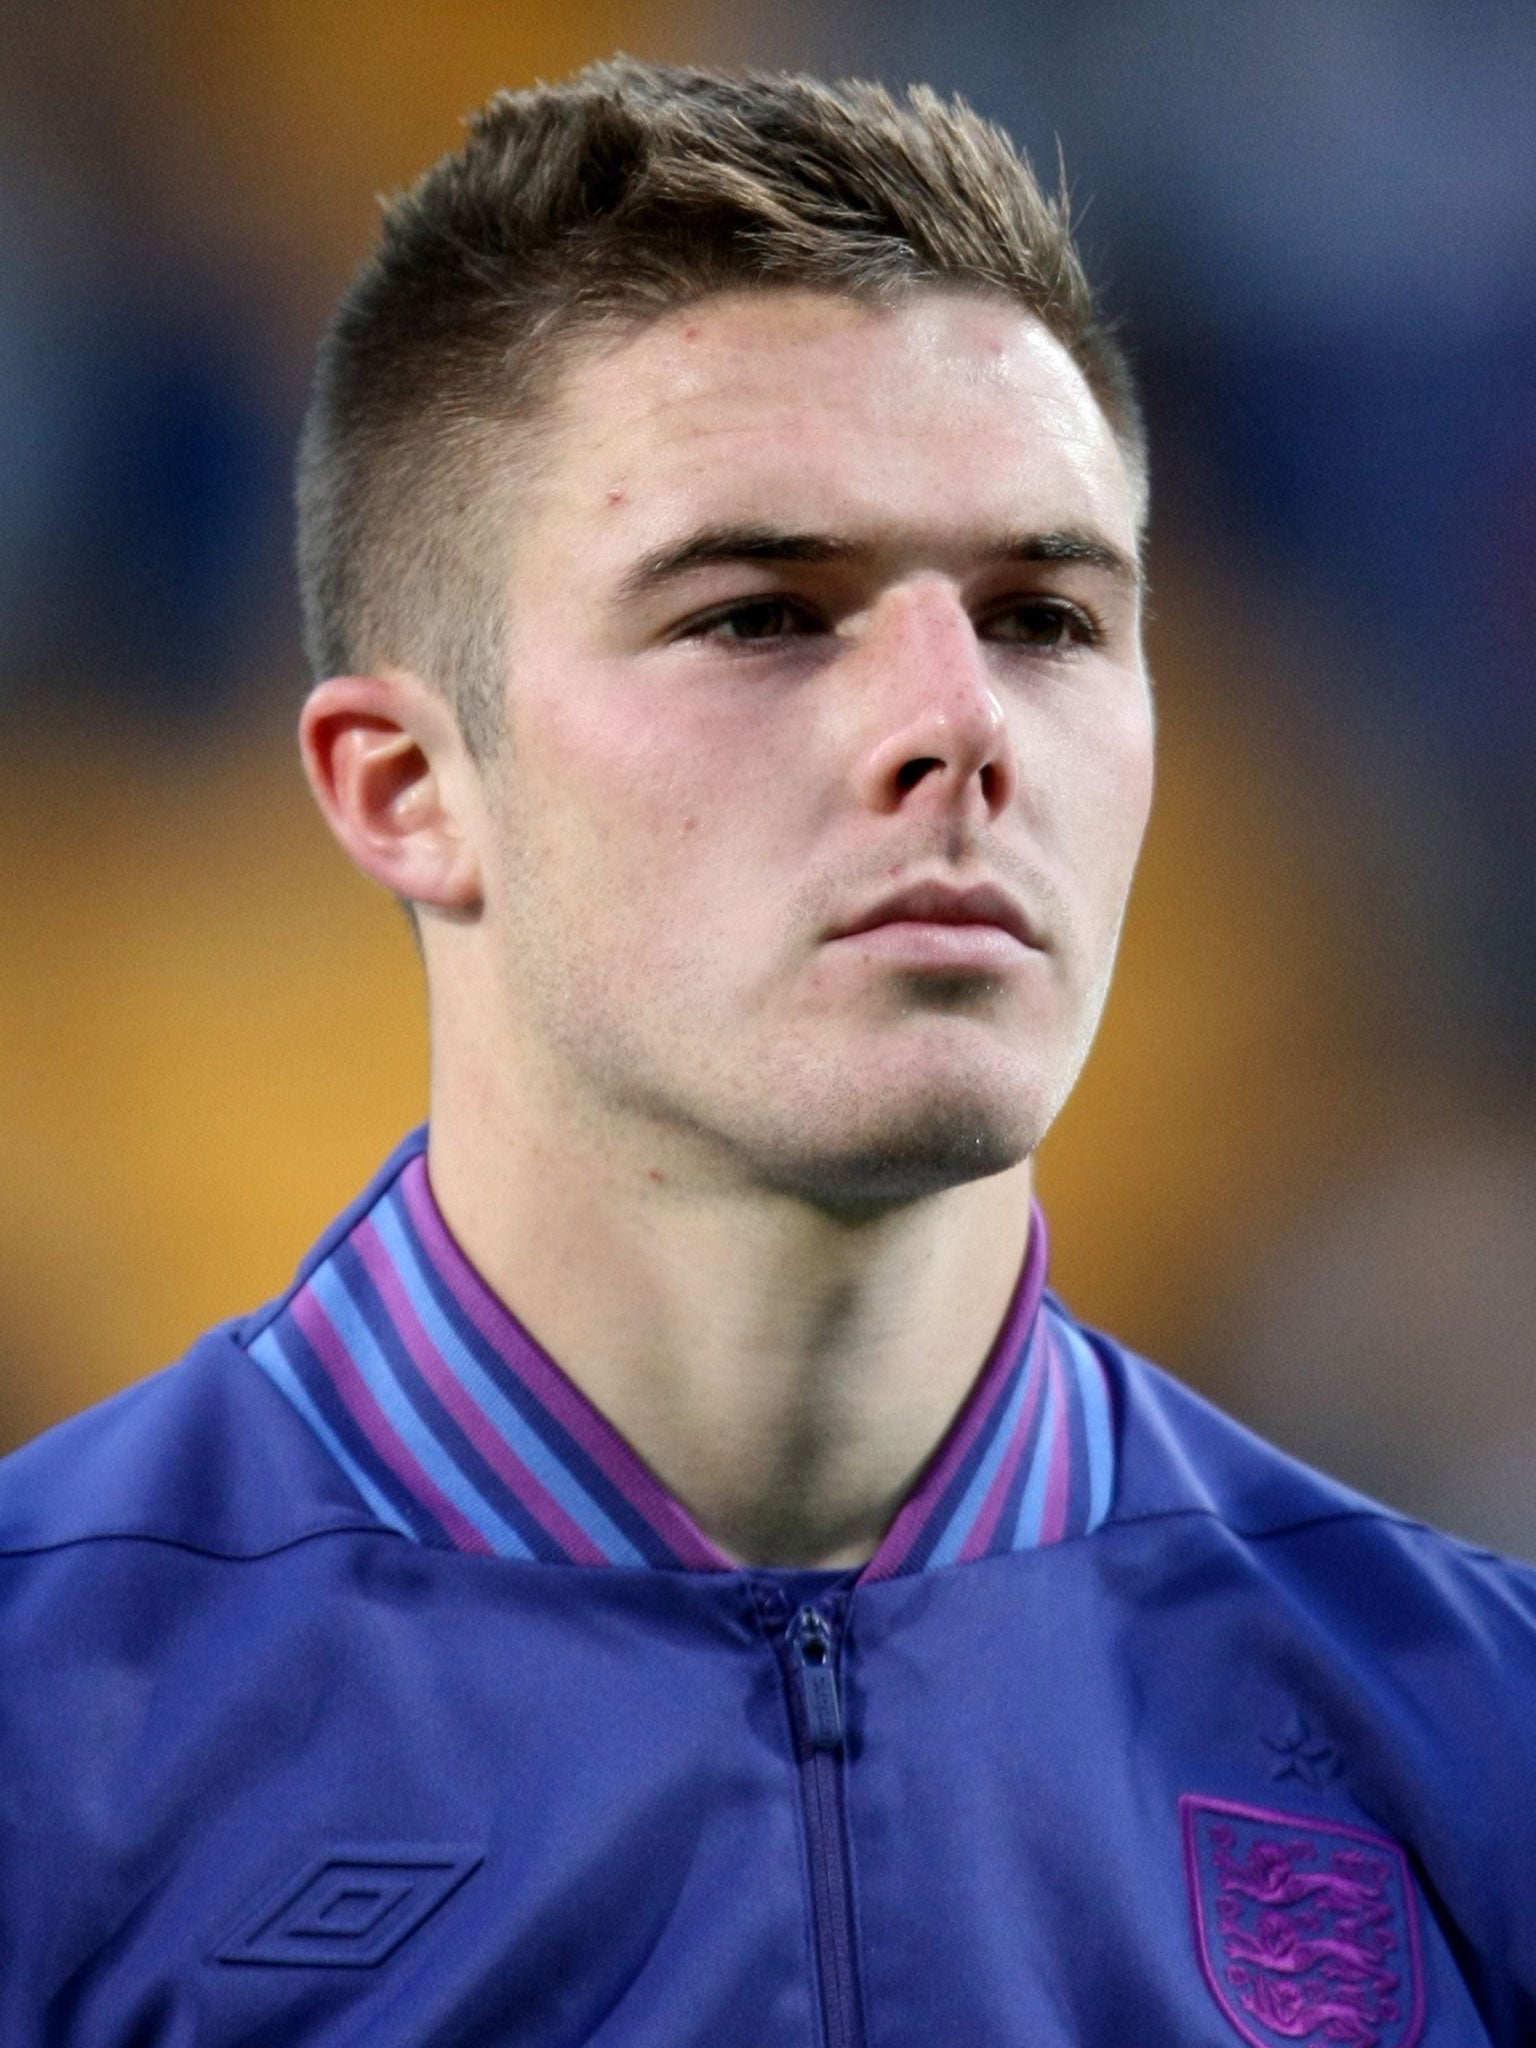 Jack Butland: The young England goalkeeper has finalised a £4m move to Stoke